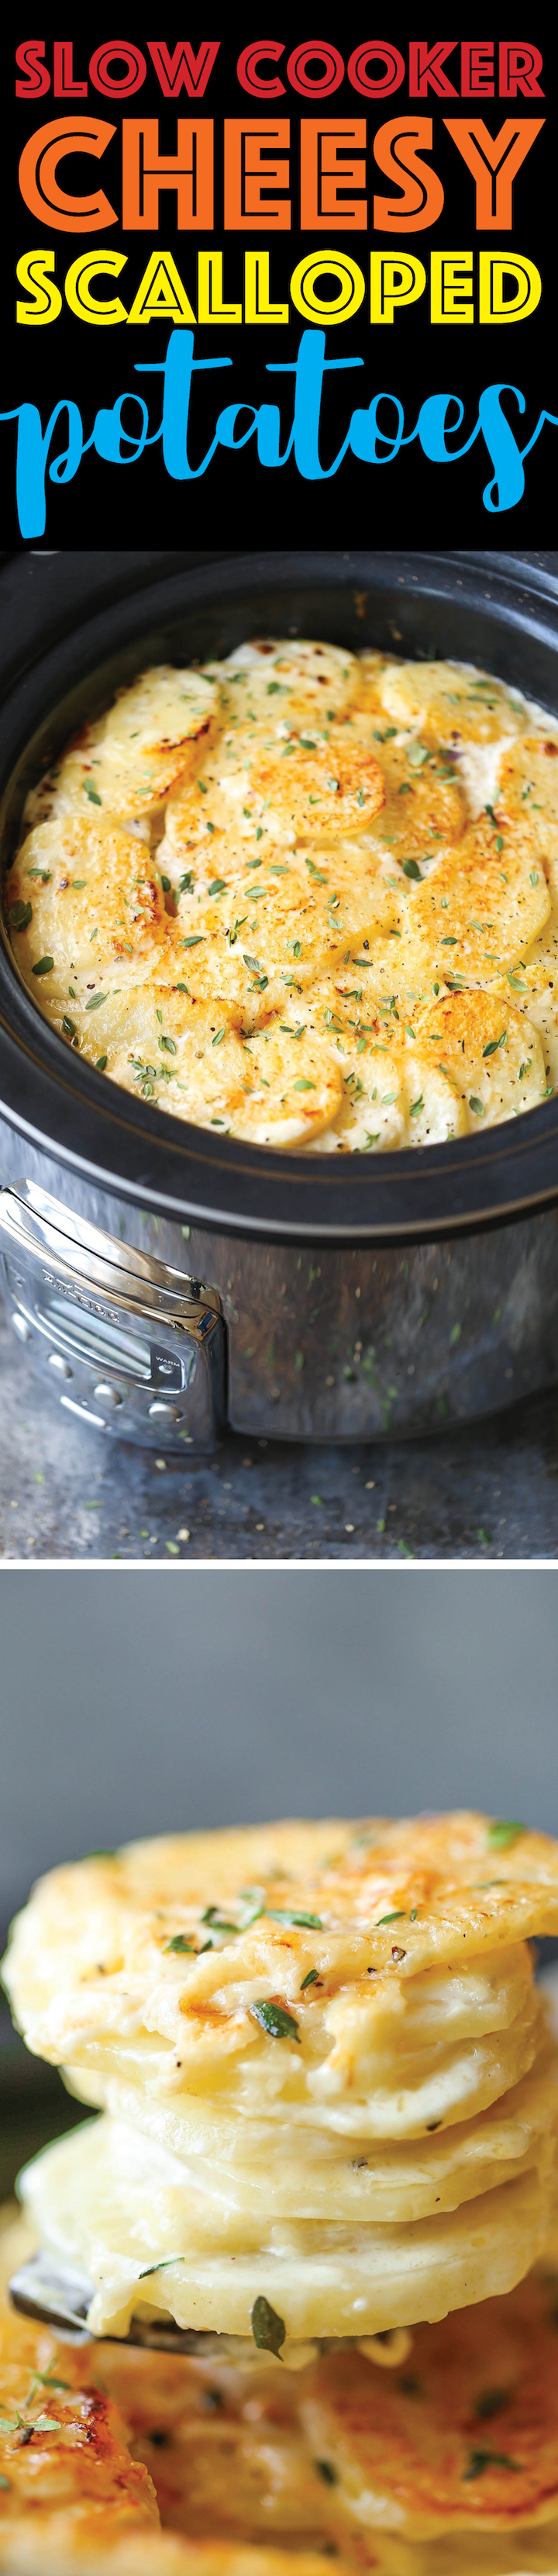 Slow Cooker Cheesy Scalloped Potatoes - This crockpot version of scalloped potatoes is so EASY, creamy, tender and cheesy! And it frees up your oven space!